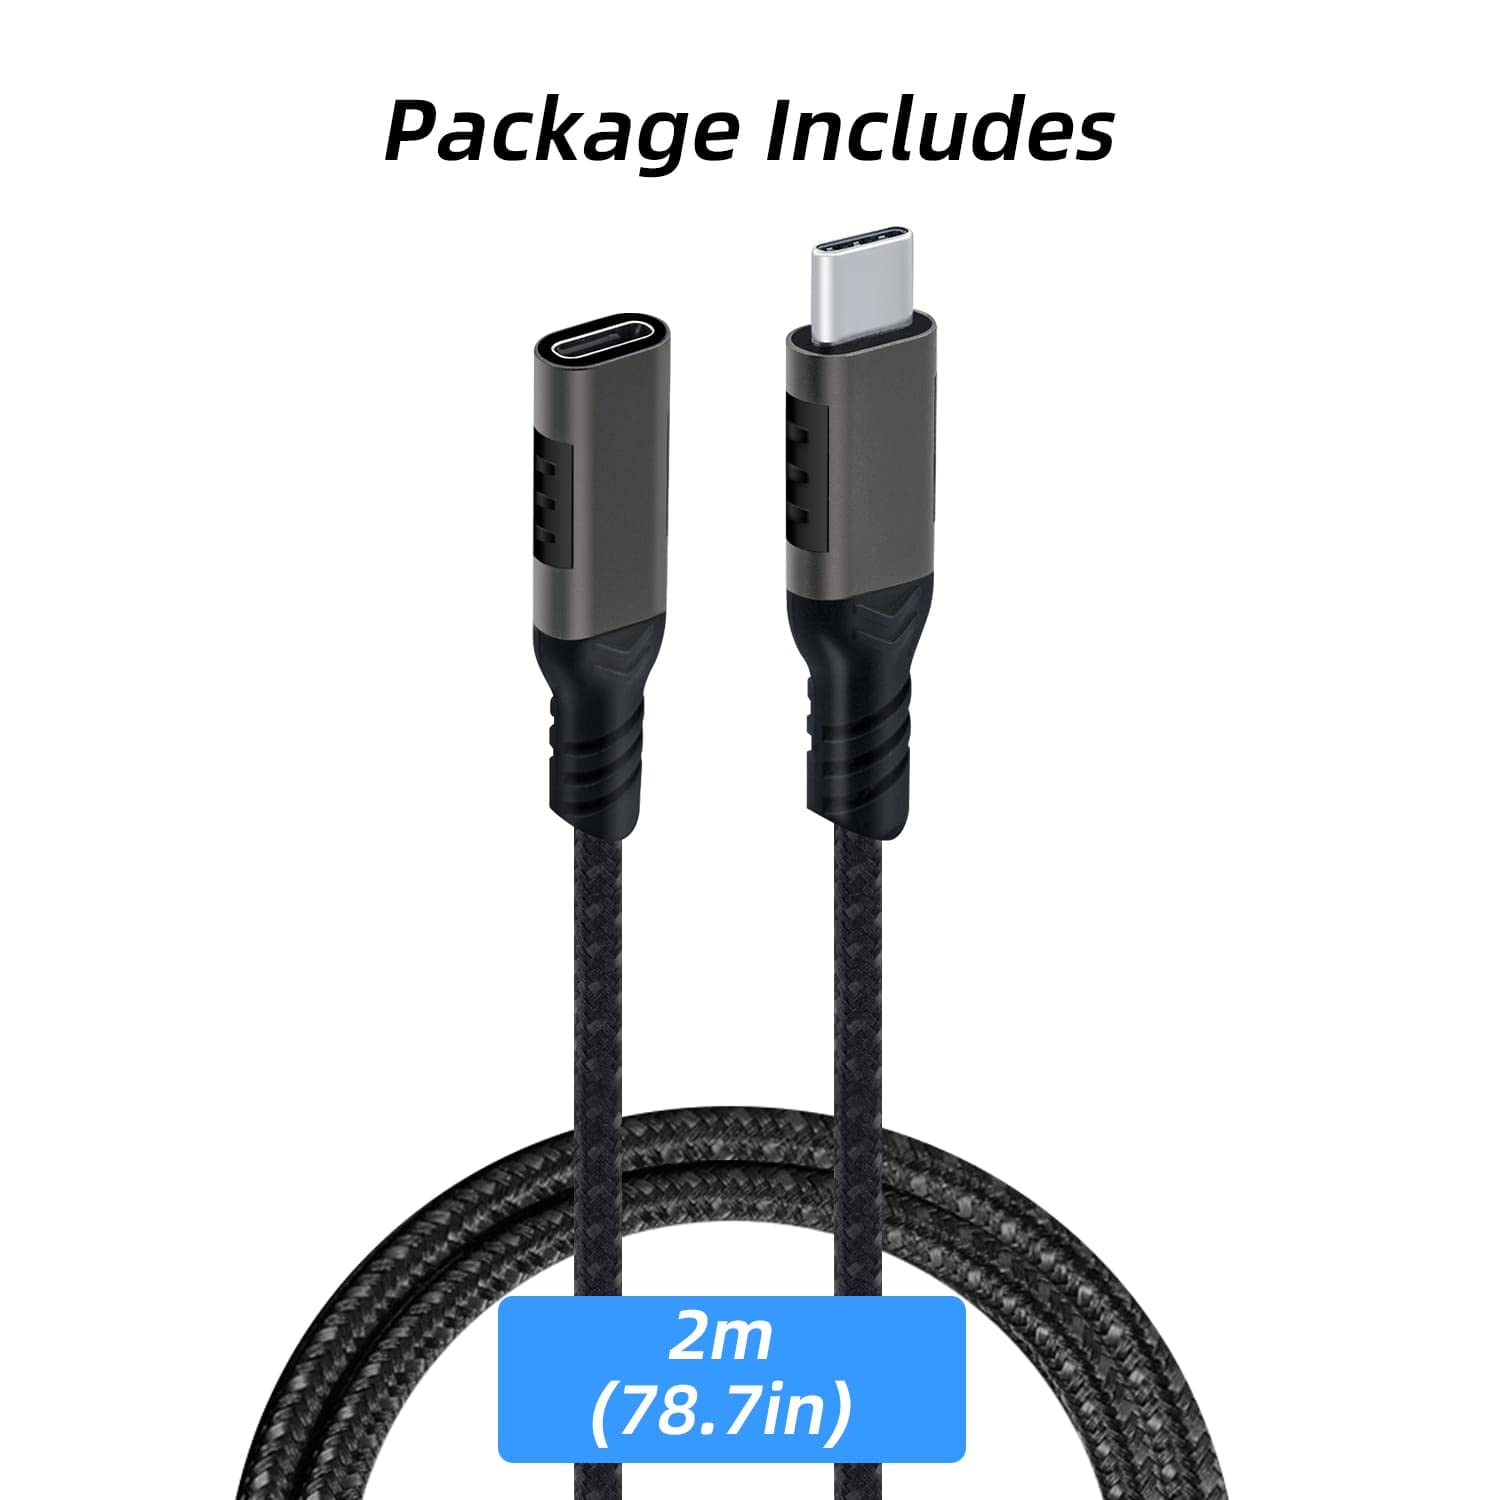 Mcbazel USB C Extension Cable,Type C Extender Cable Male to Female 3.1 10Gbps Fast Charge Audio Data Transfer Cable Compatible with NS-Switch/O-culus Quest/Quest3/Laptop - 6.56FT FWLB